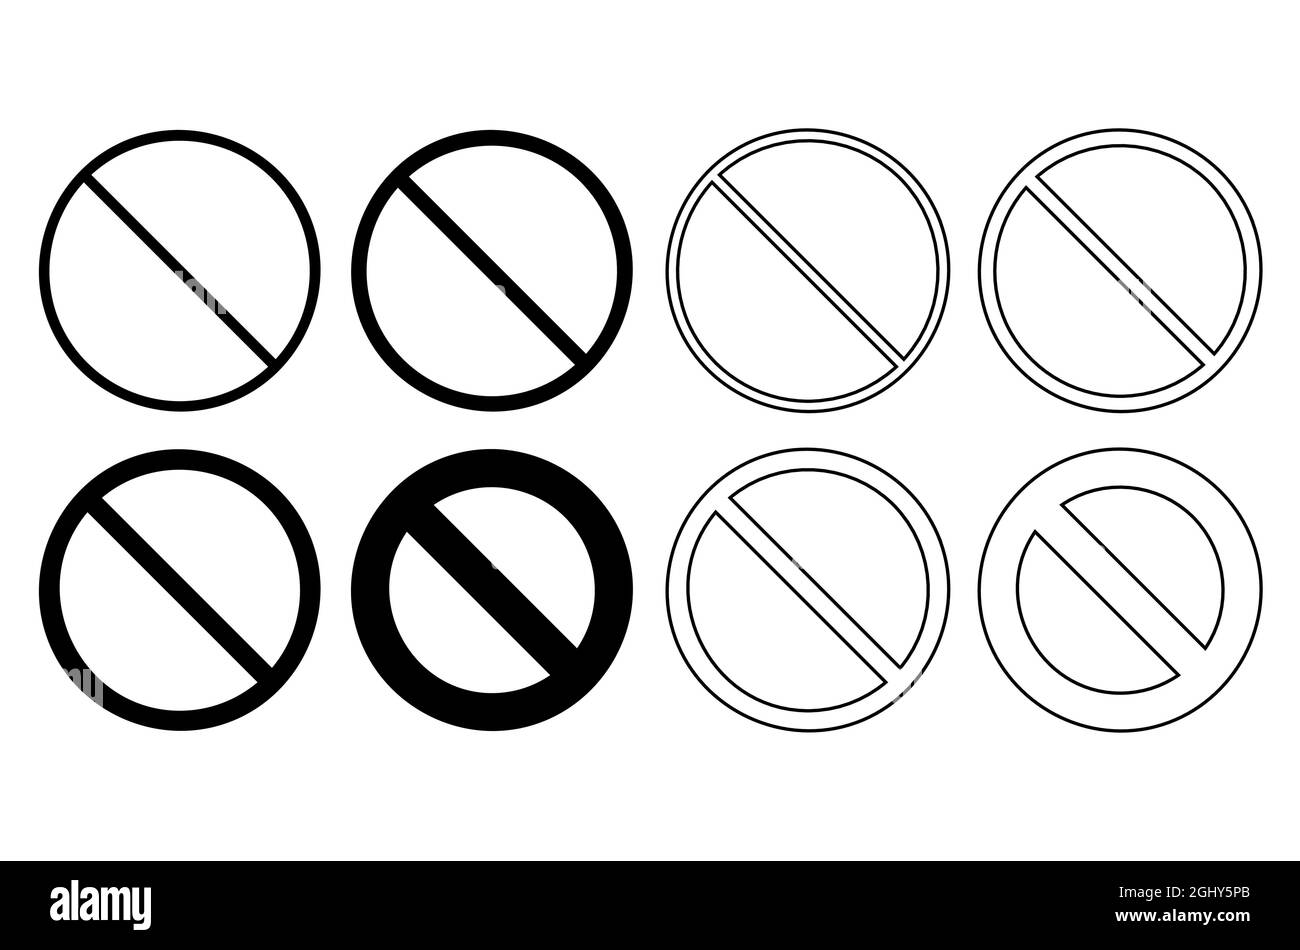 Forbidden sign icon. Black round no symbol set. Silhouette and outline design. Vector illustration isolated on white. Stock Vector